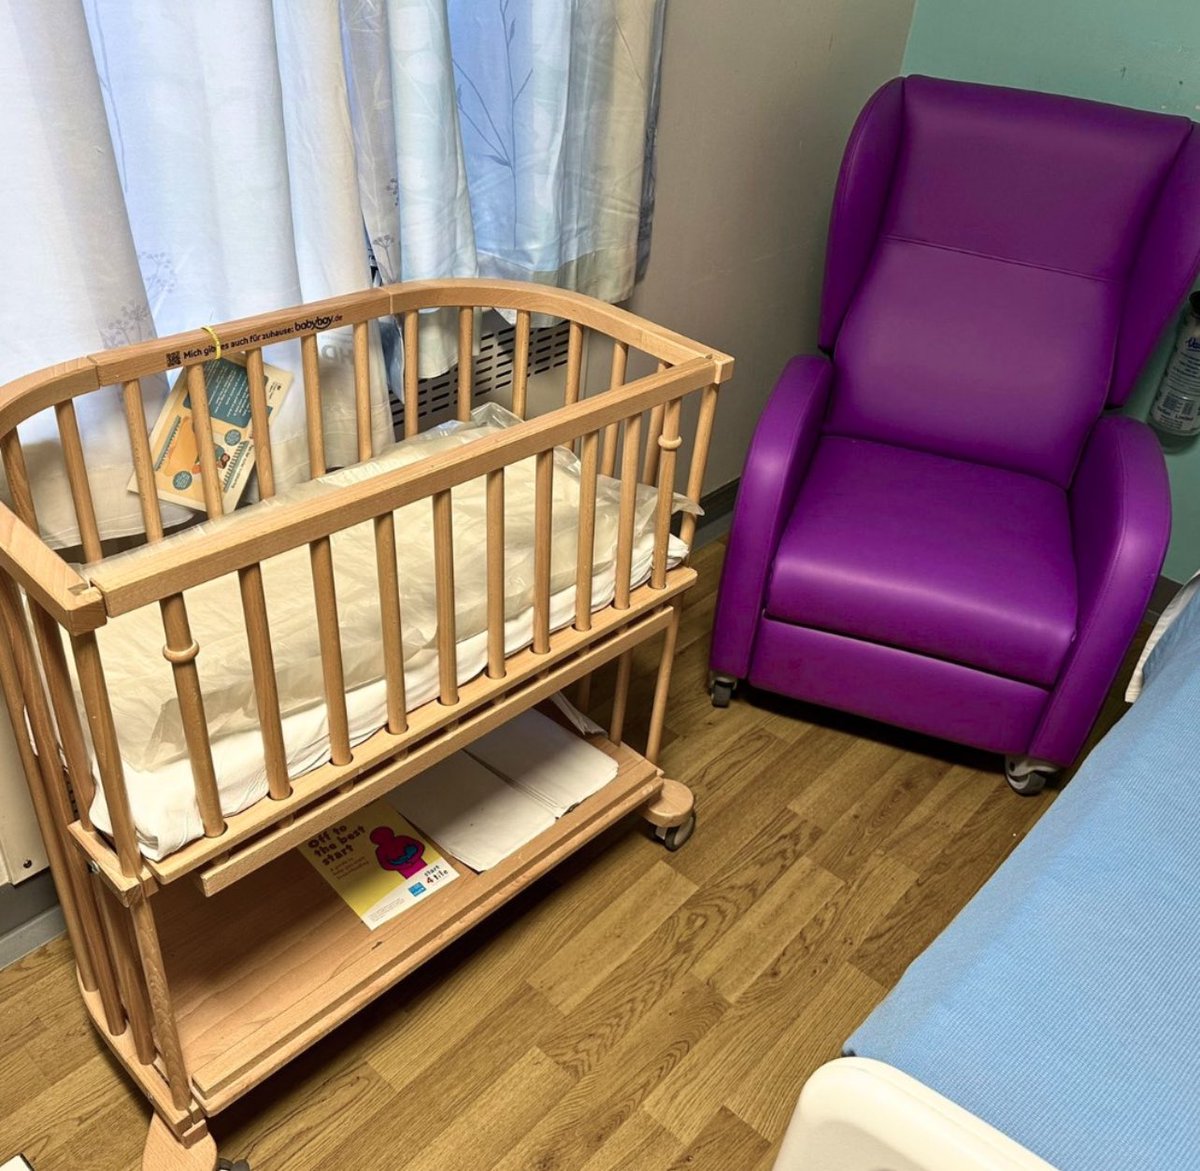 We love seeing our products when we are out and about & this cosy, little room in Harrogate is no different! 

The Maternity Recliner Chair fits perfectly next to the bed  & Co-Sleeper Cot has a soft, non-clinical look and can be placed alongside the bed to position baby safely.